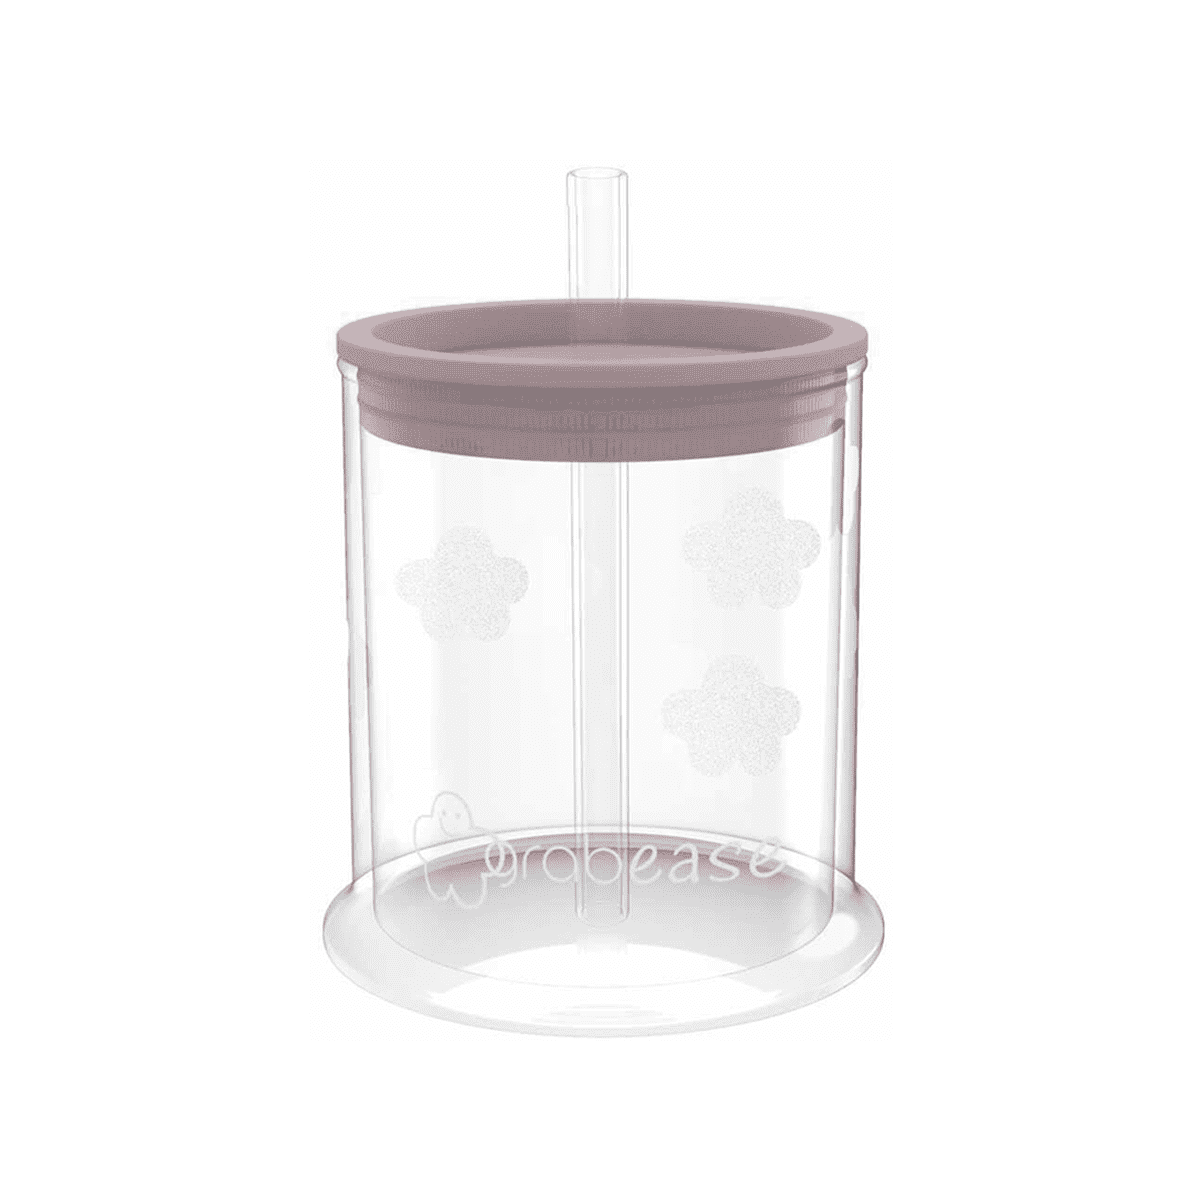 Pink Grabease 3 in 1 baby cup used as a straw cup